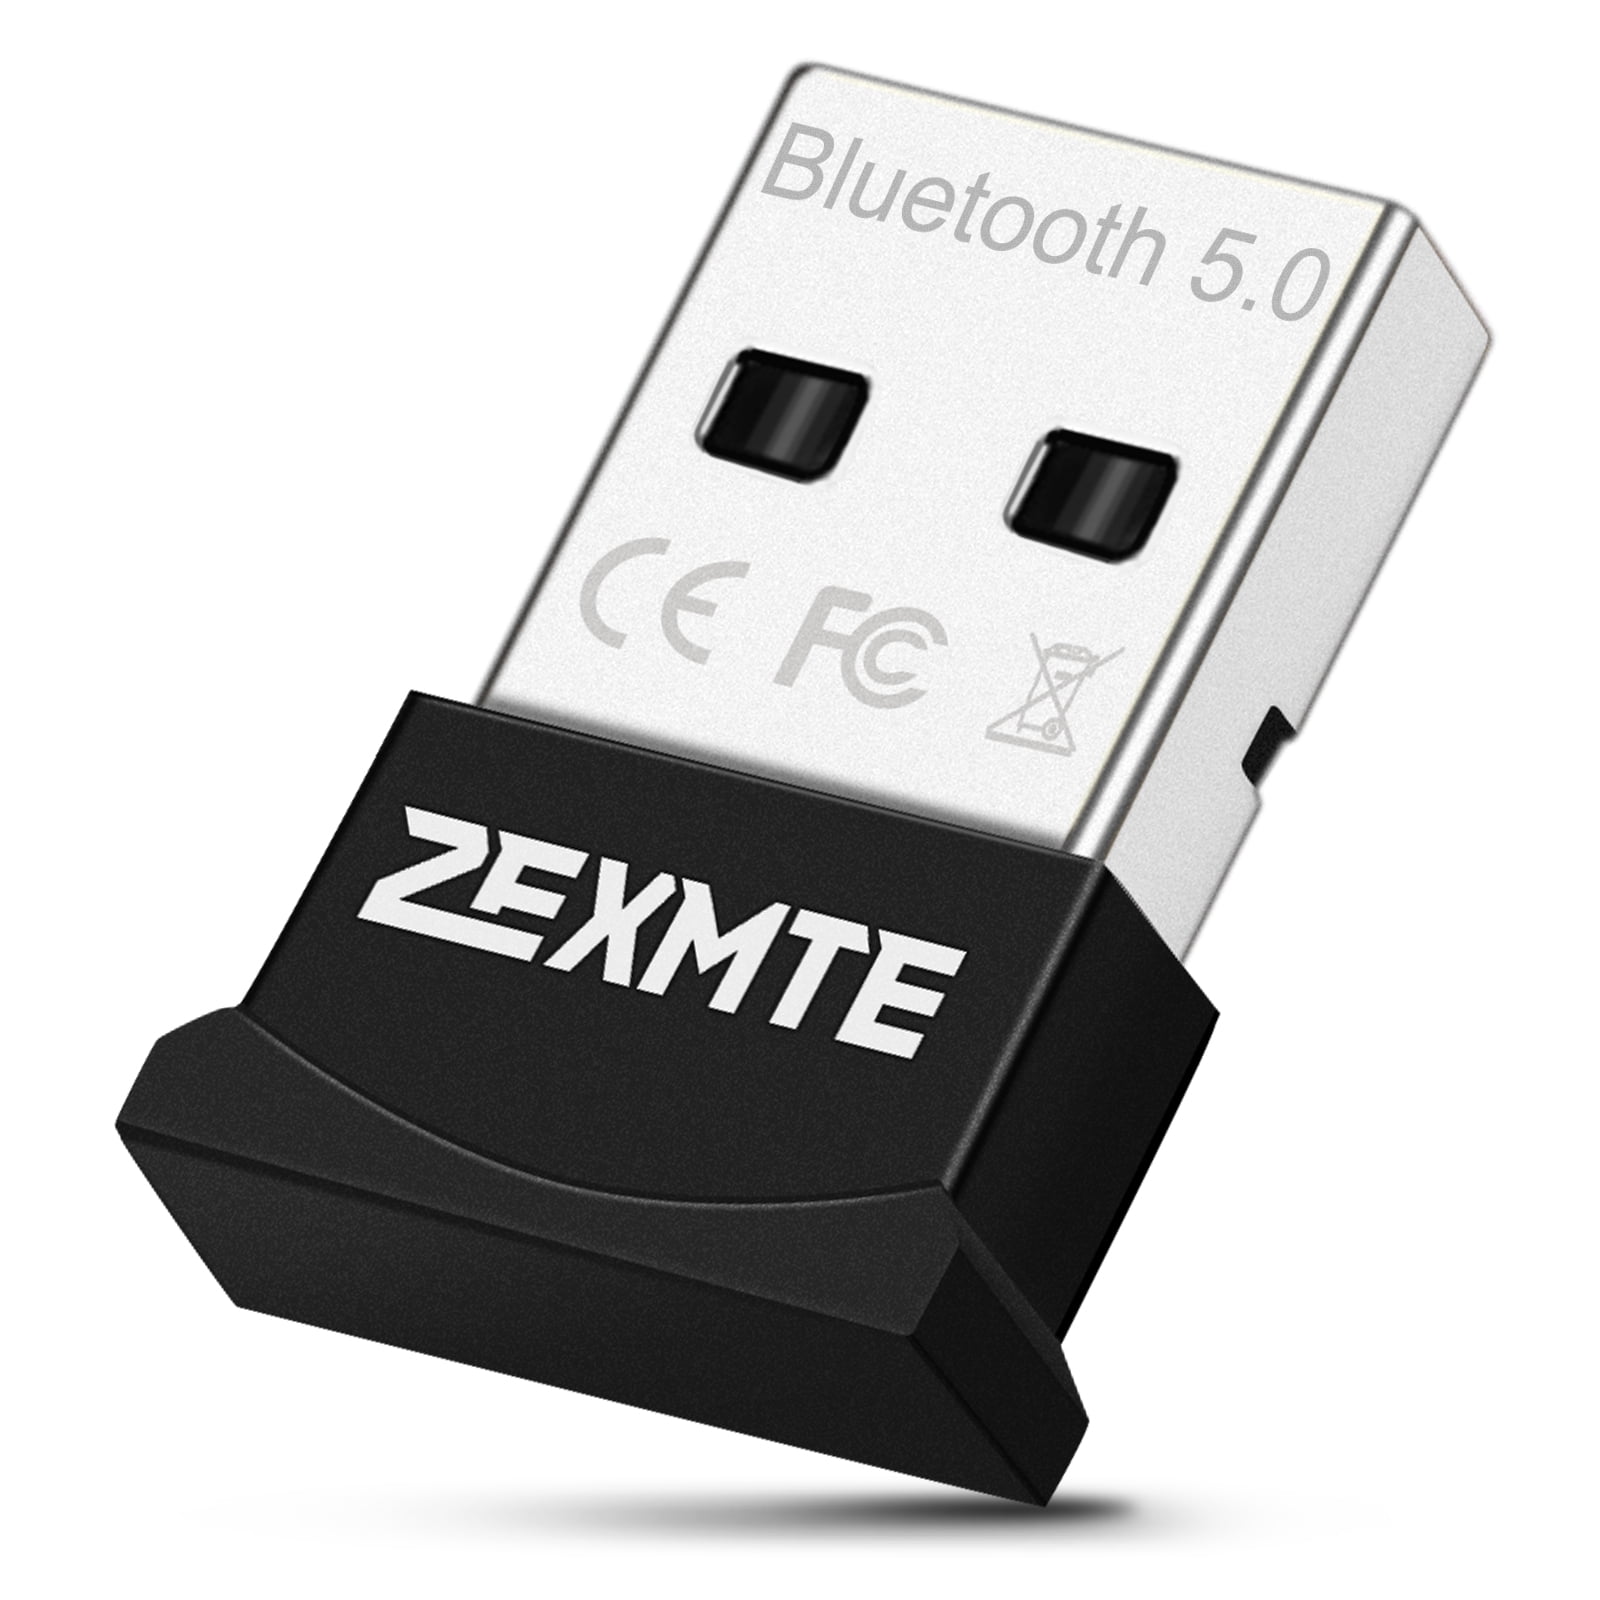 Zexmte USB Bluetooth Adapter for PC Bluetooth 5.0 Dongle Compatible with 10/8/7 for Desktop, Laptop, Mouse, Keyboard, Speakers - Walmart.com